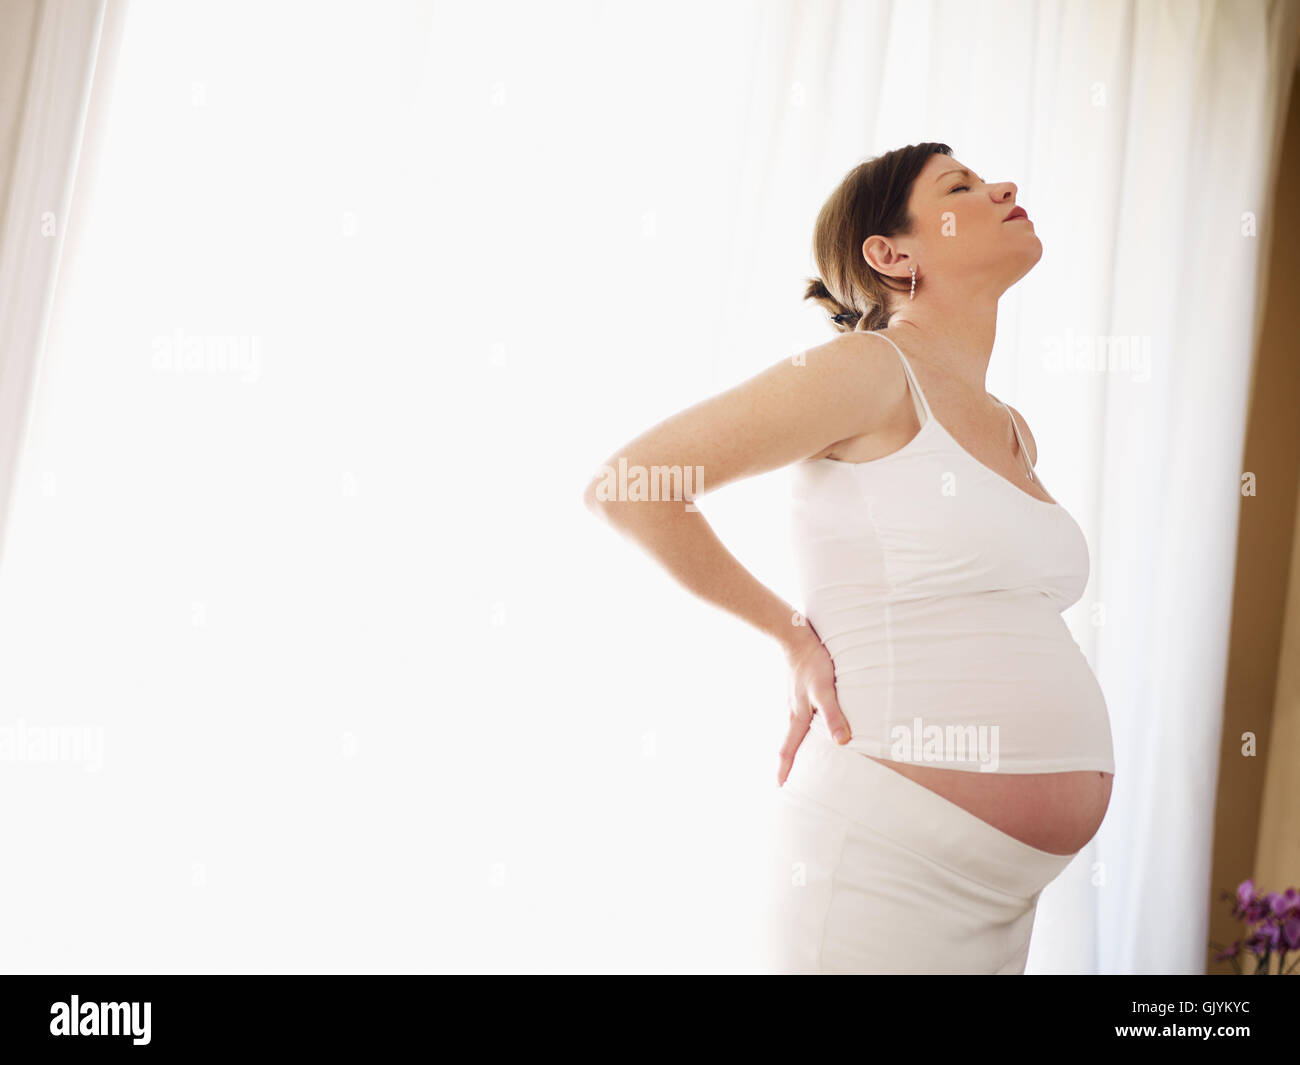 woman pain mother Stock Photo